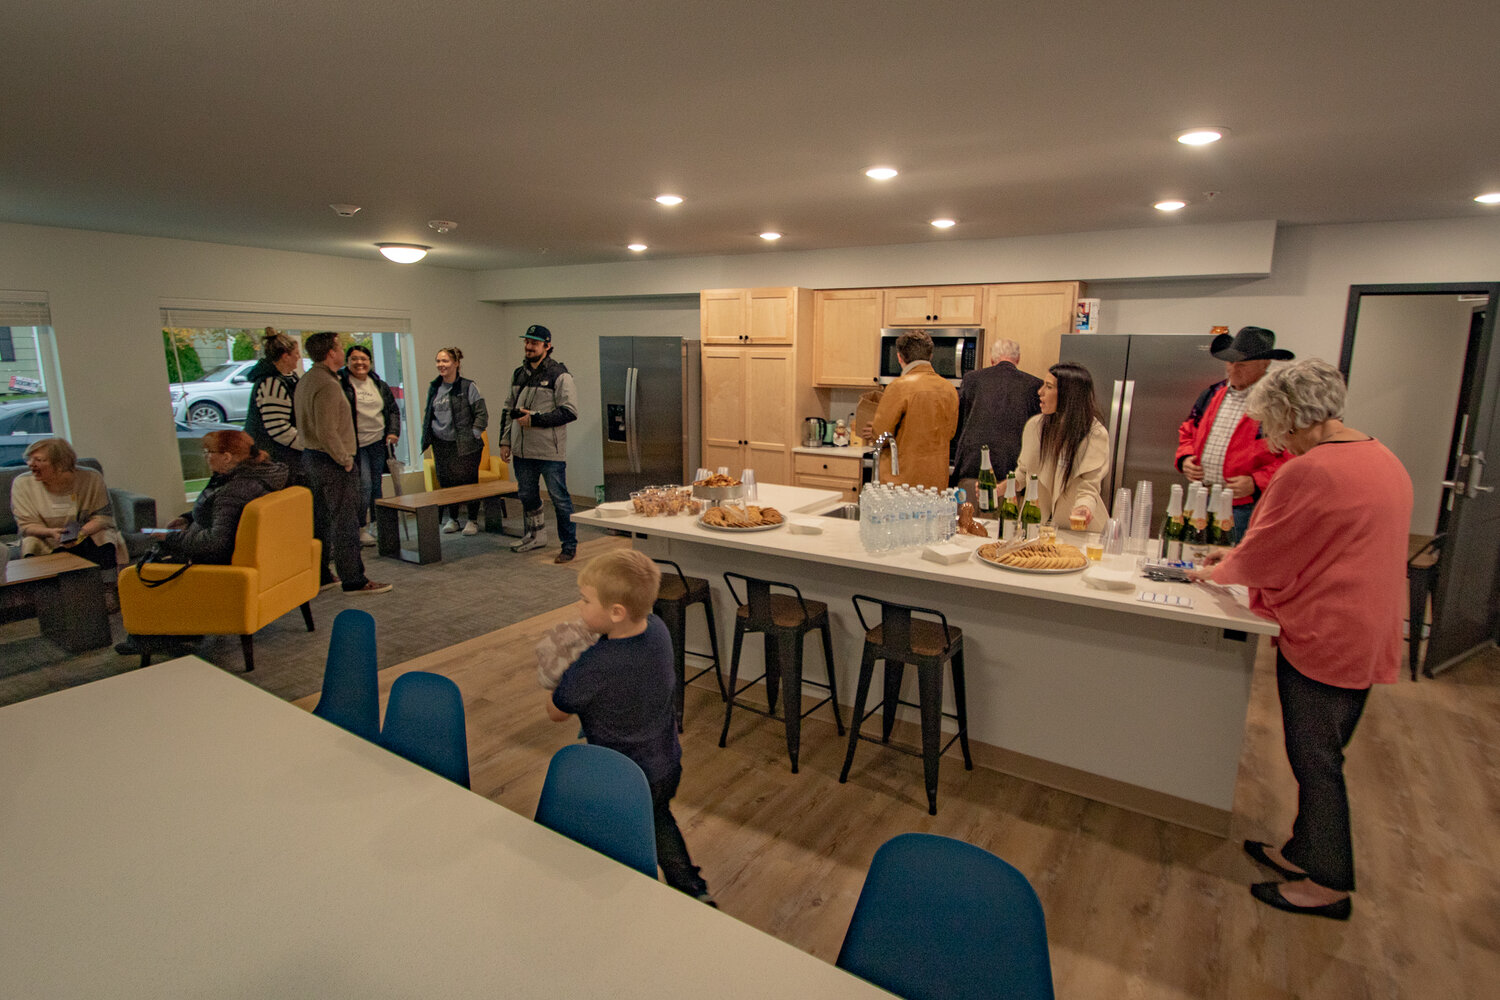 Guests gather in an apartment common area and kitchen for an open house celebrating the completion of the new CHI apartments, located at 111 S. Ash Street, on Tuesday, Nov. 7.